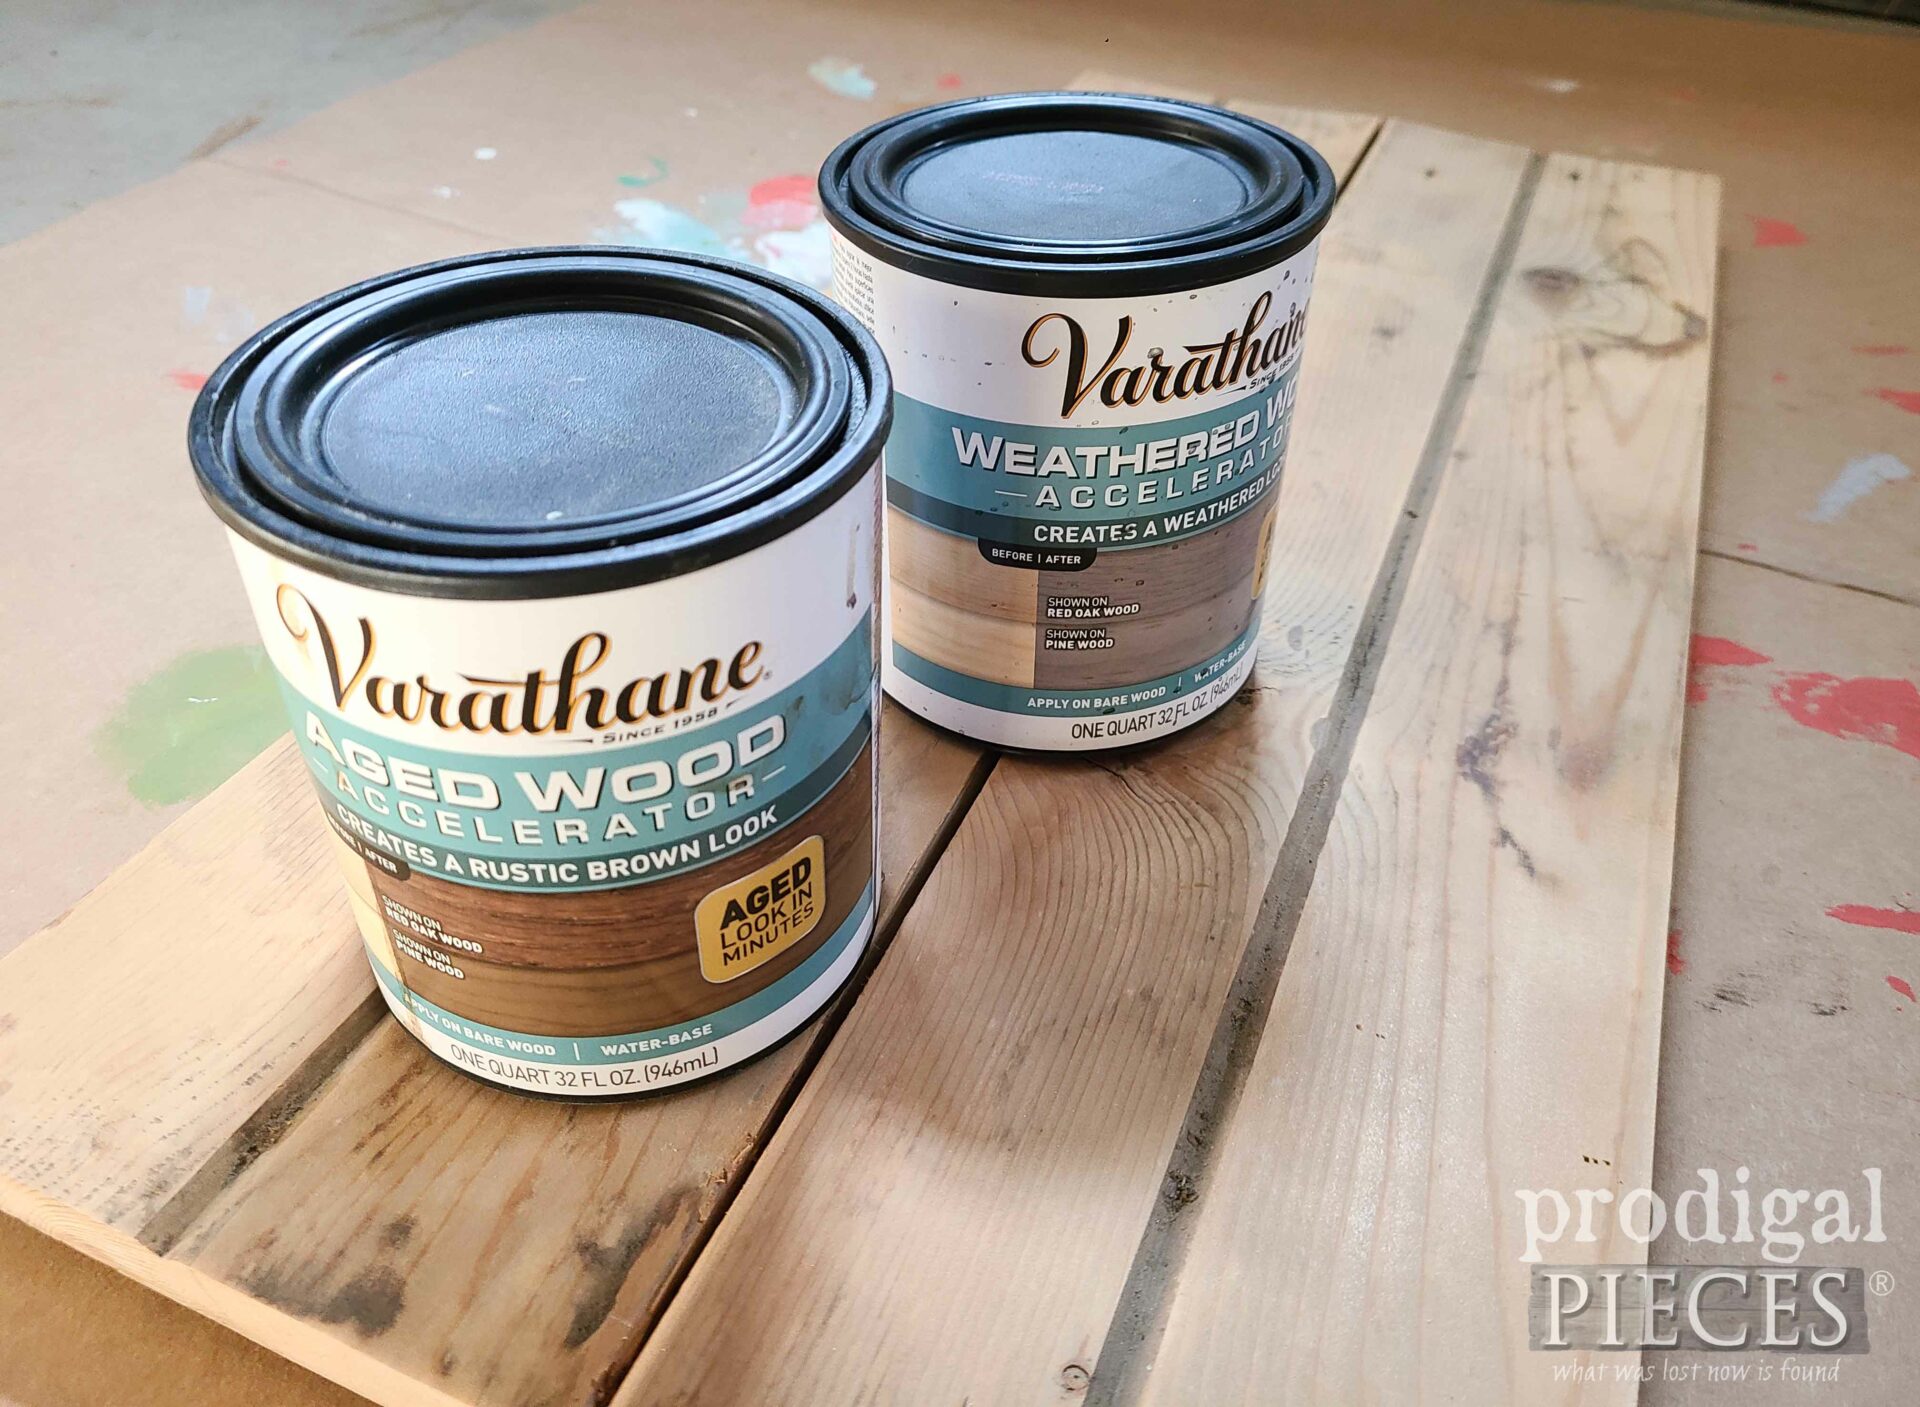 Varathane Reactive Stains for Reclaimed Wall Pocket Tutorial | prodigalpieces.com #prodigalpieces